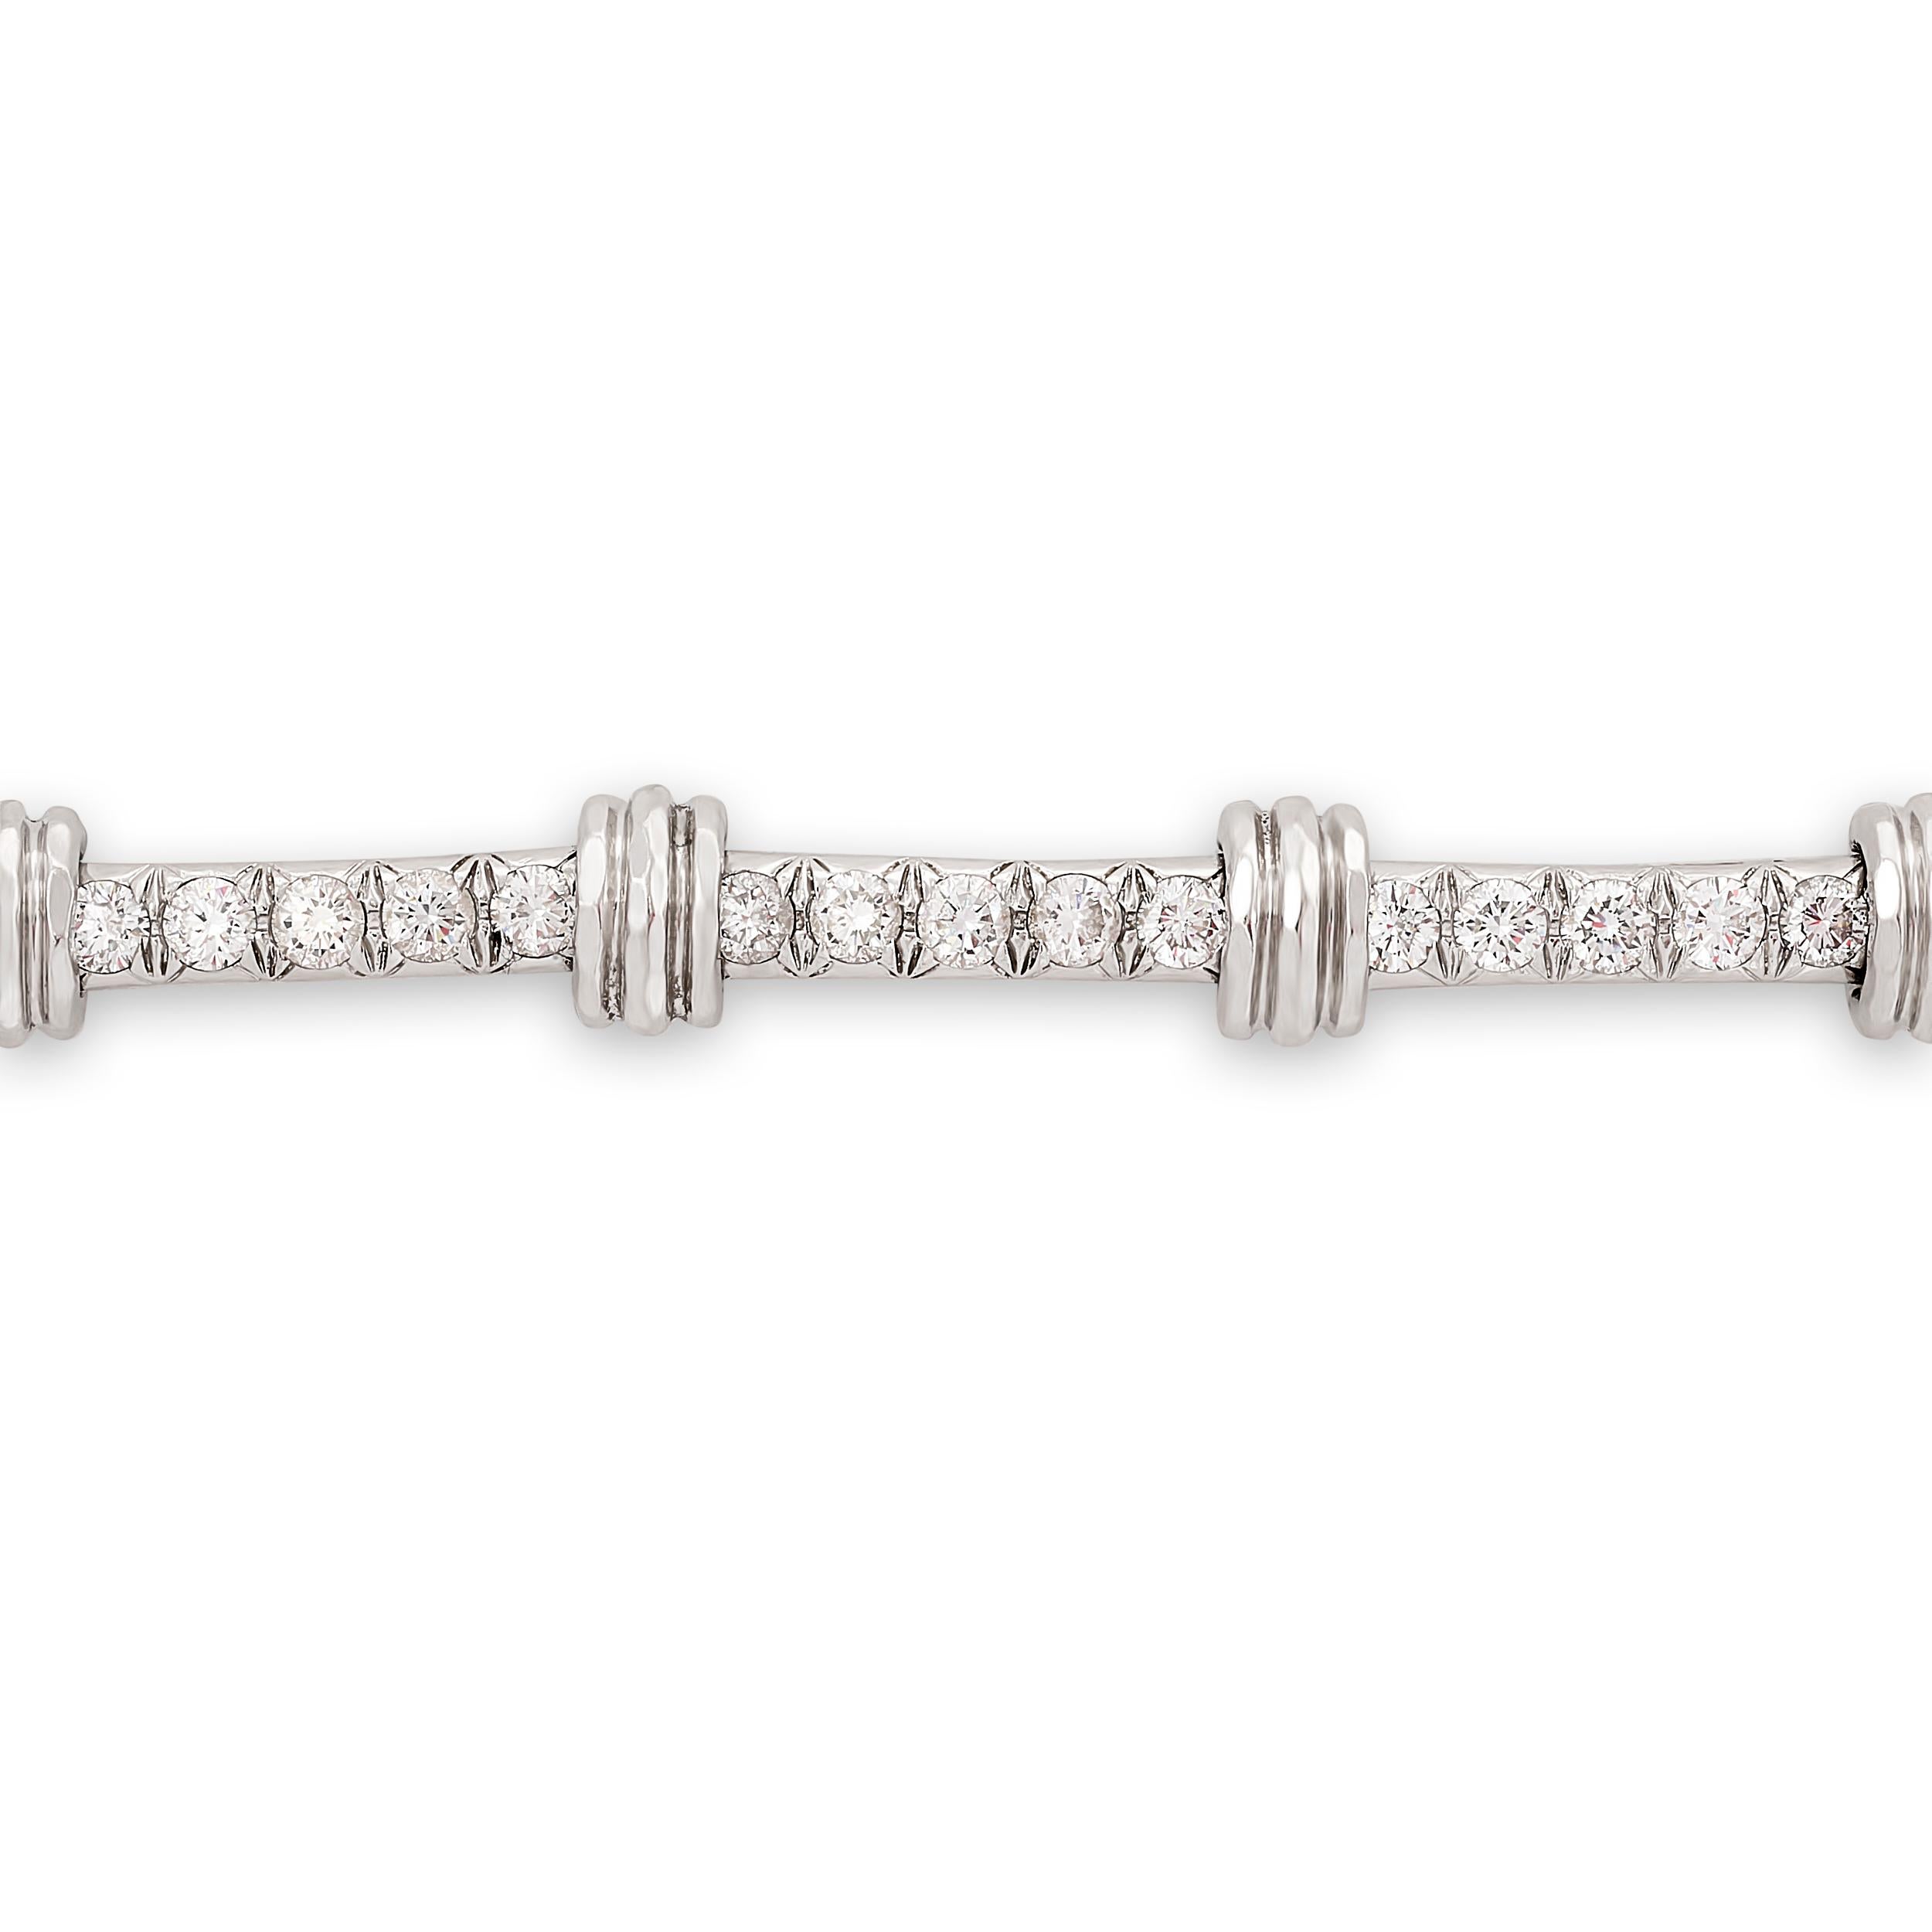 A Henry Dunay diamond bracelet boasts a unique hammered texture. This listing is for the bracelet only; the matching necklace is a separate listing.

The bracelet, made in platinum, has 15 round brilliant diamonds that weigh approximately 1.80 total